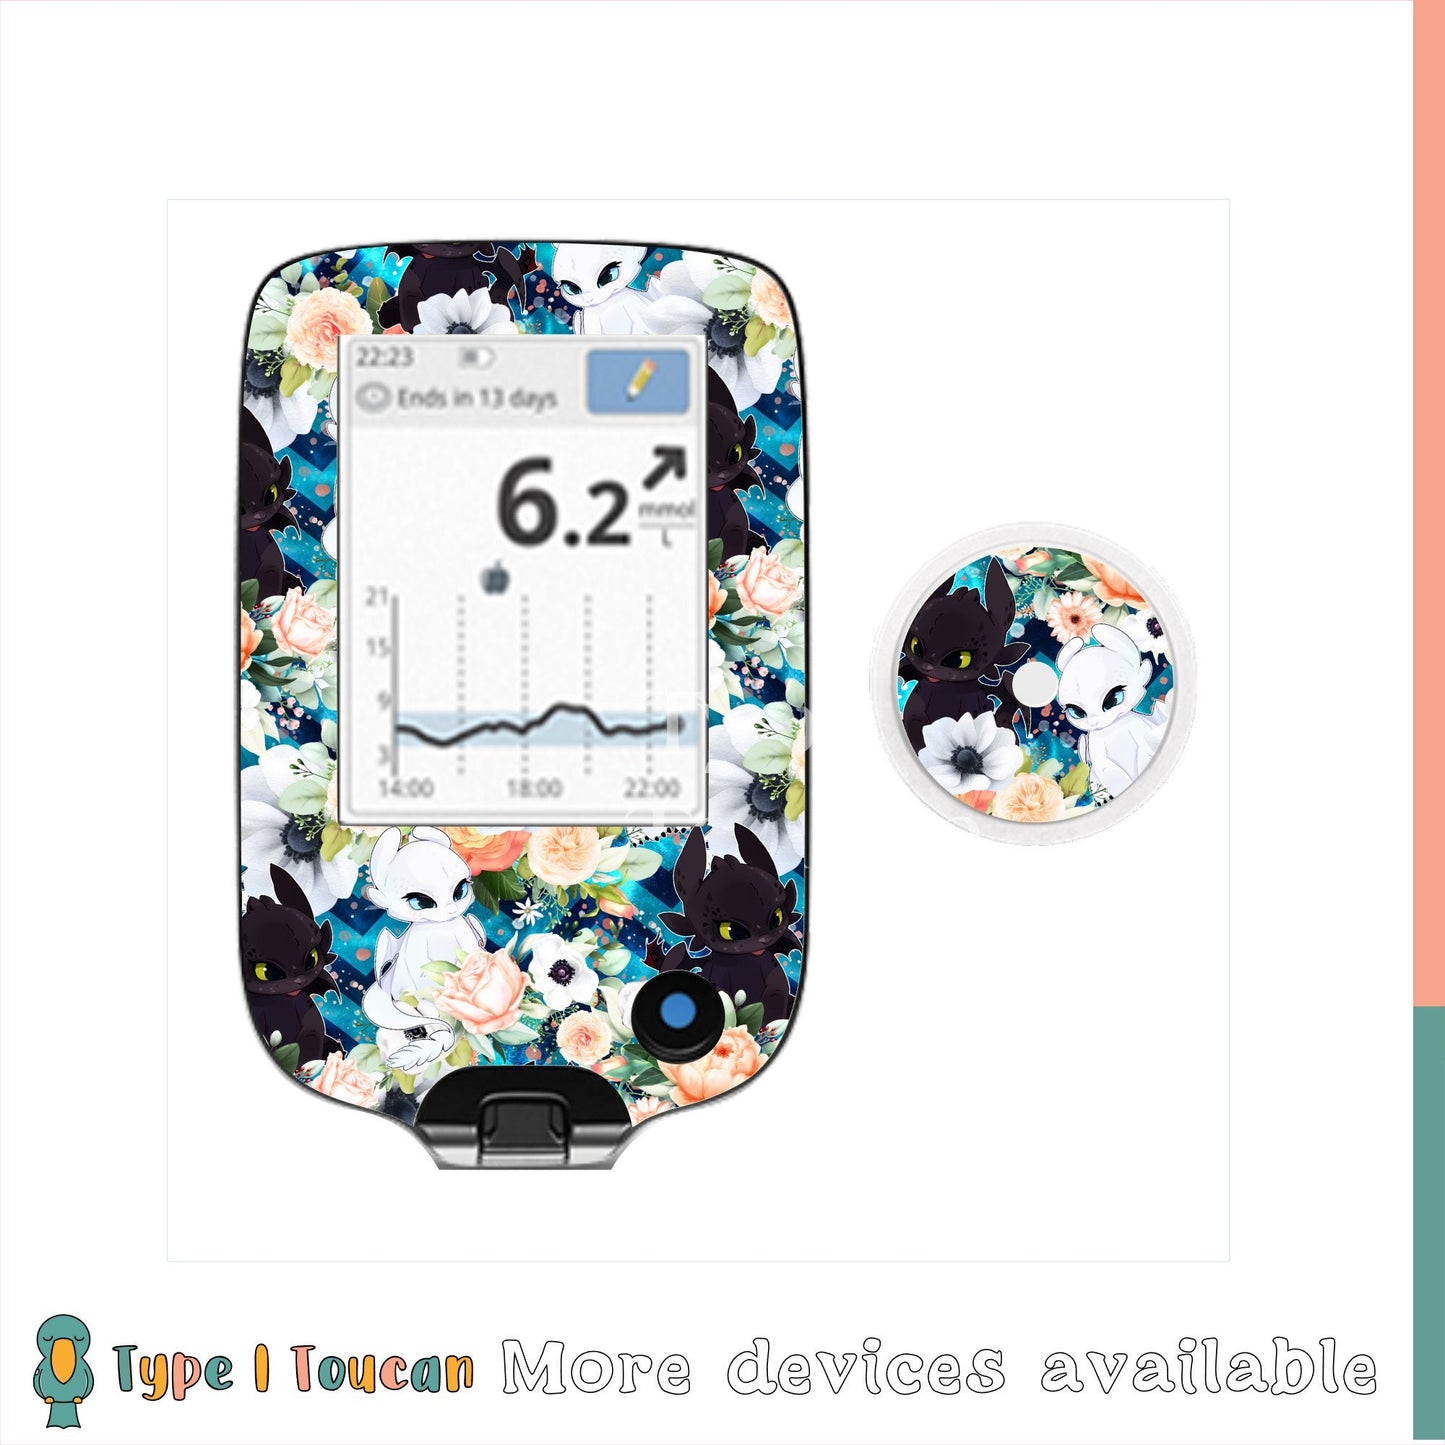 Dragon without teeth | Diabetes Stickers | Floral Flowers Dexcom G6 Stickers Omnipod Freestyle Libre Tslim Minimed Medtronic Pump Contour